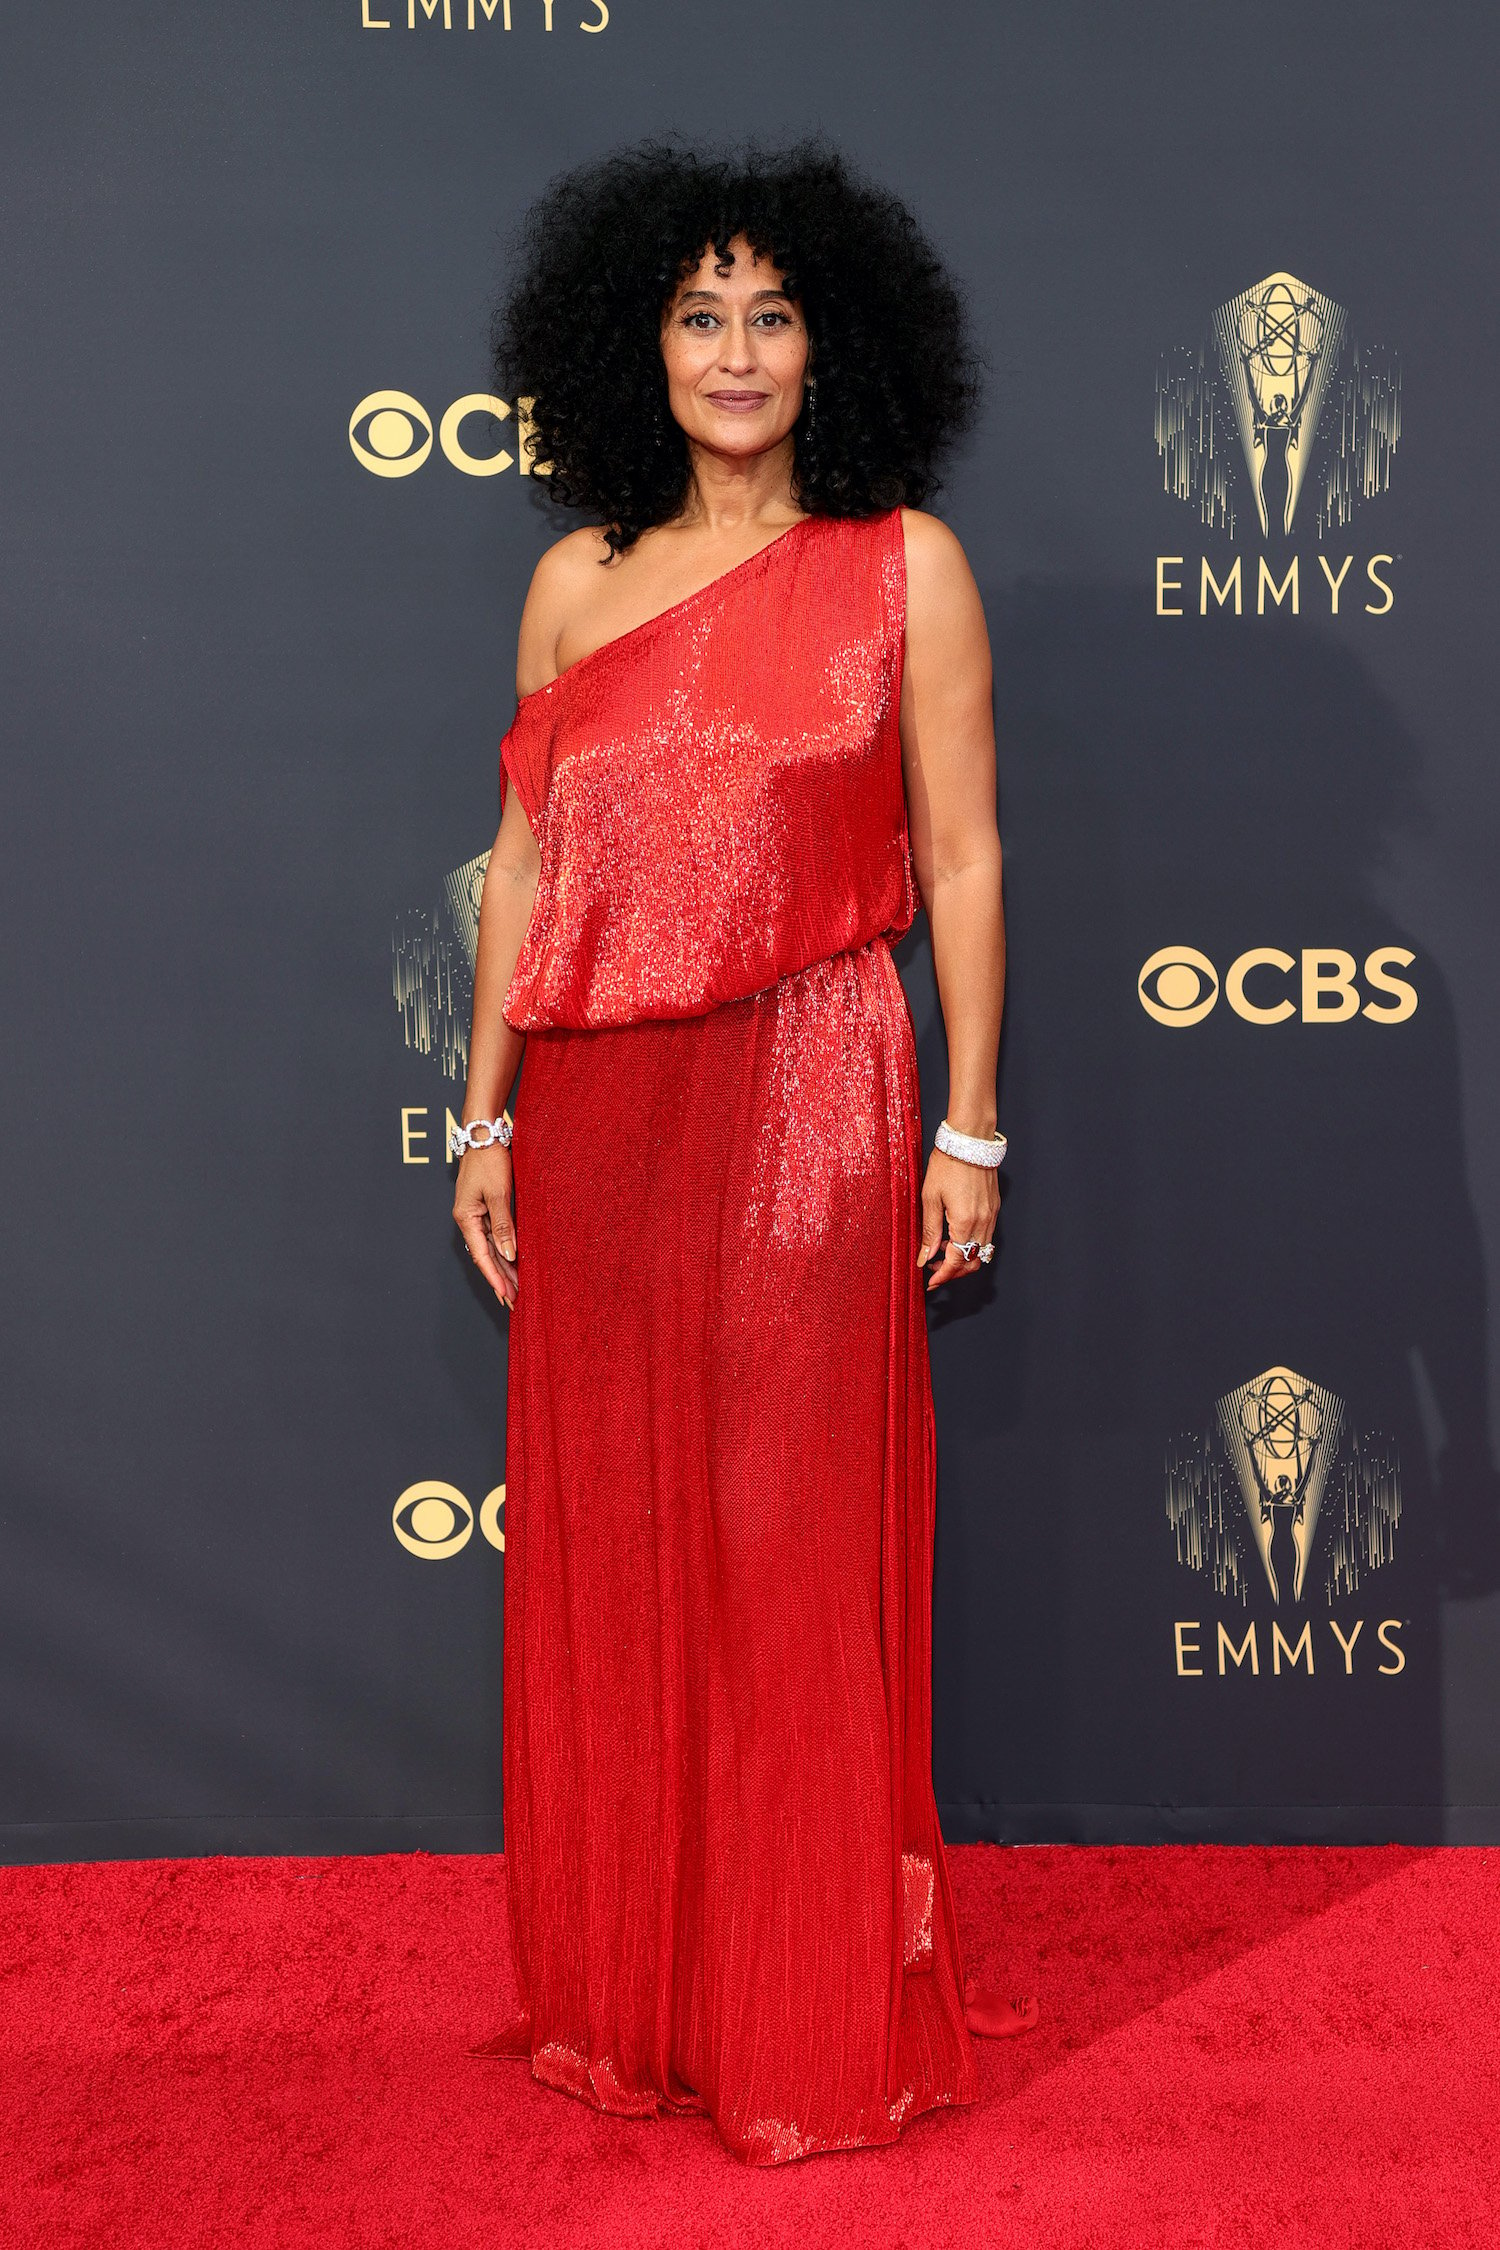 Tracee Ellis Ross wears a red gown on the 2021 Emmys red carpet